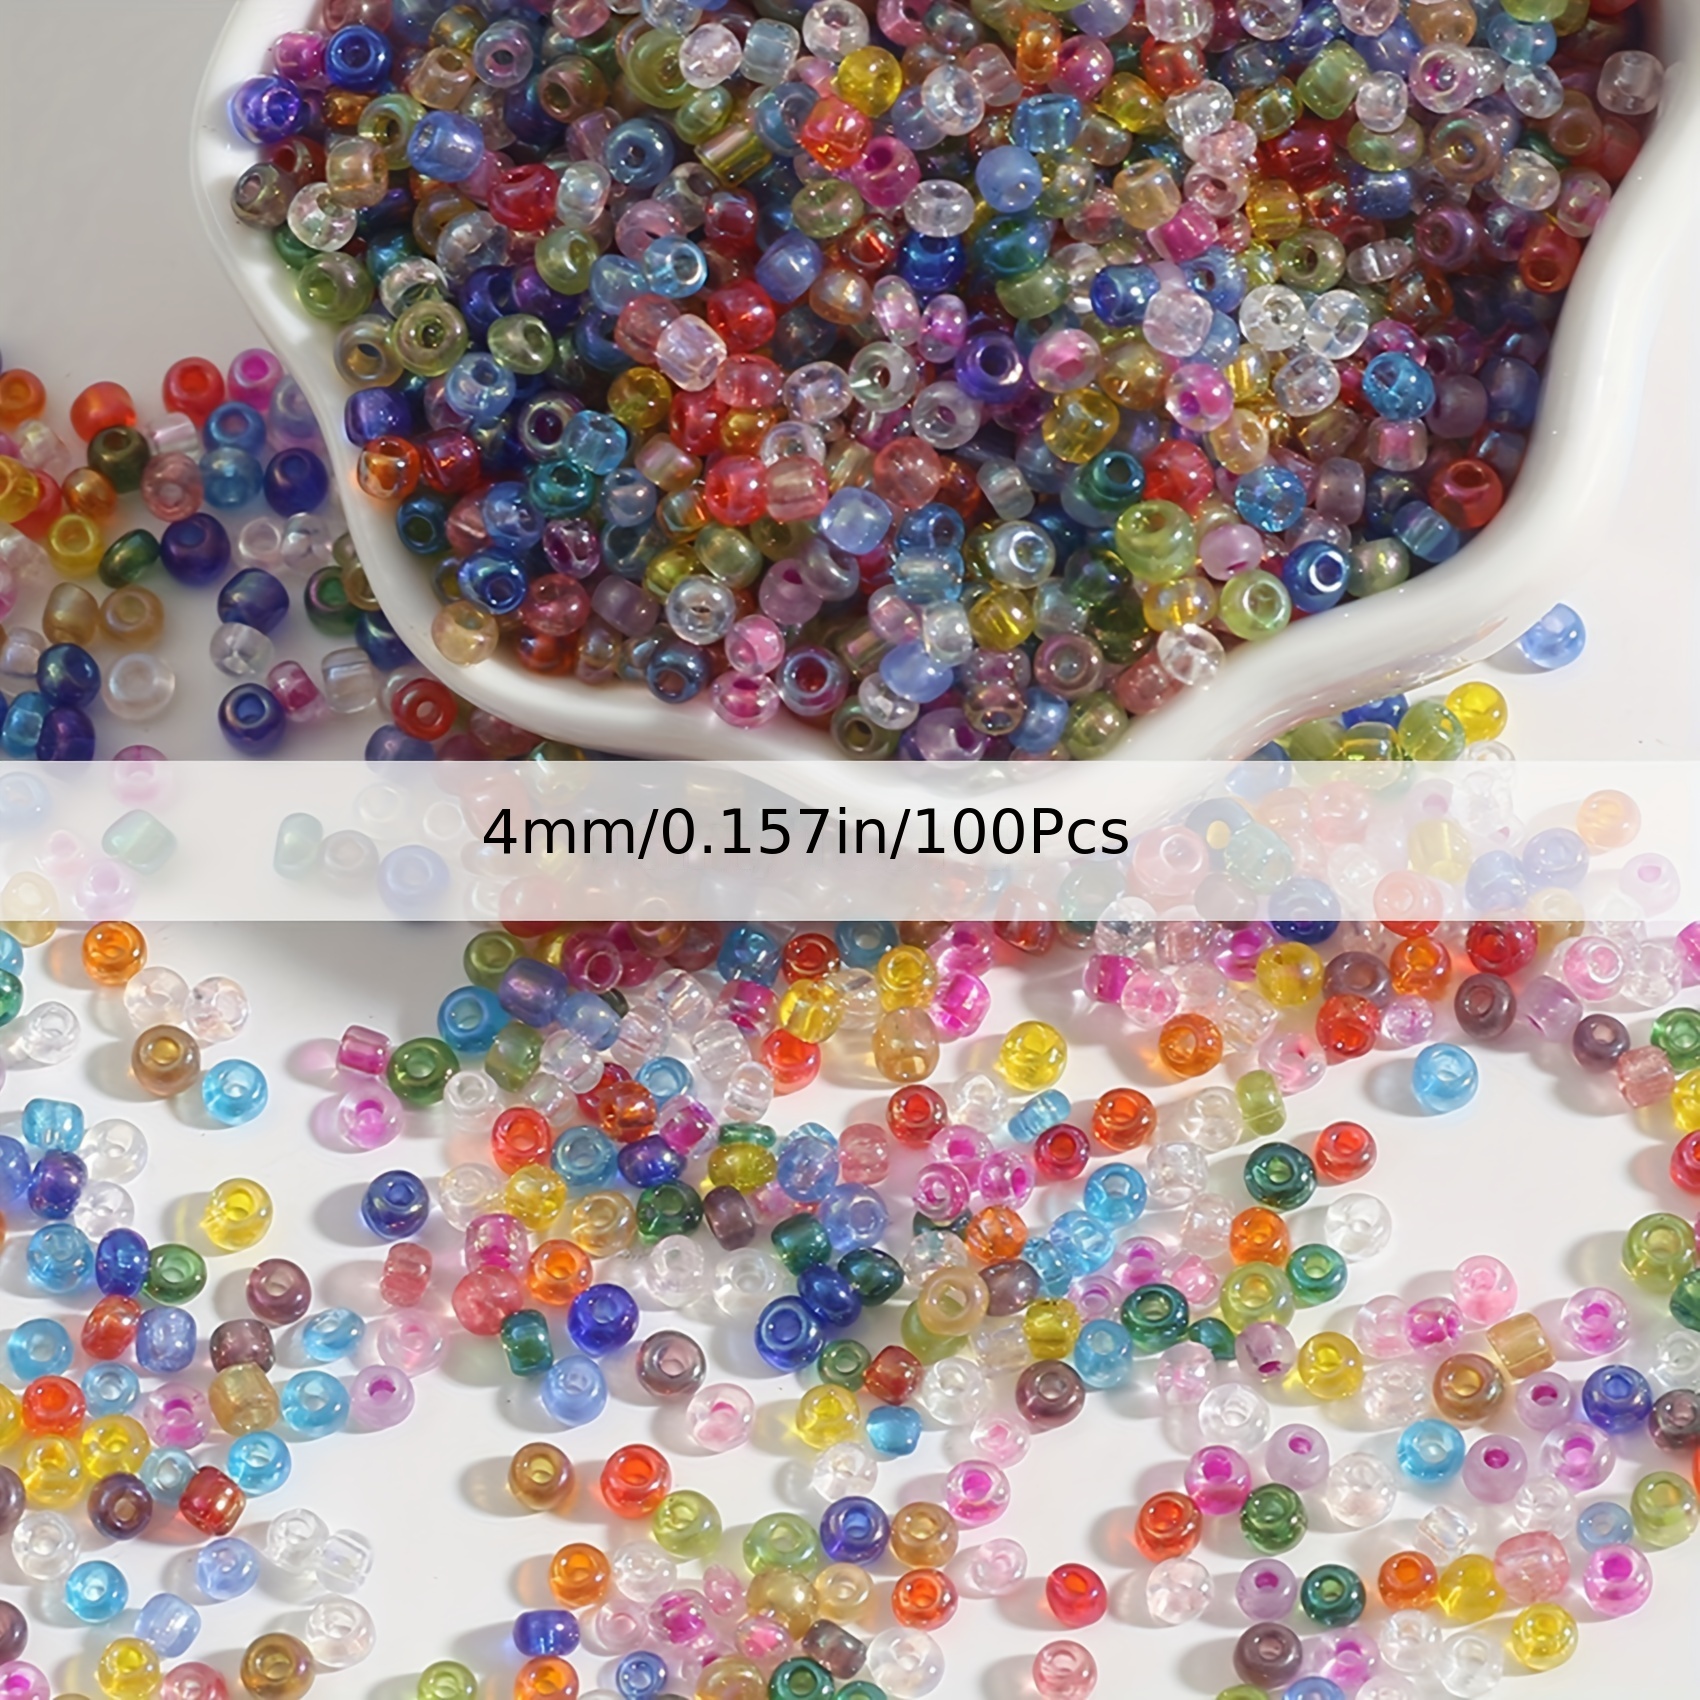 15g 2mm 3mm 4mm Glass beads Wear Resistant Opaque Round Spacer Beads For DIY